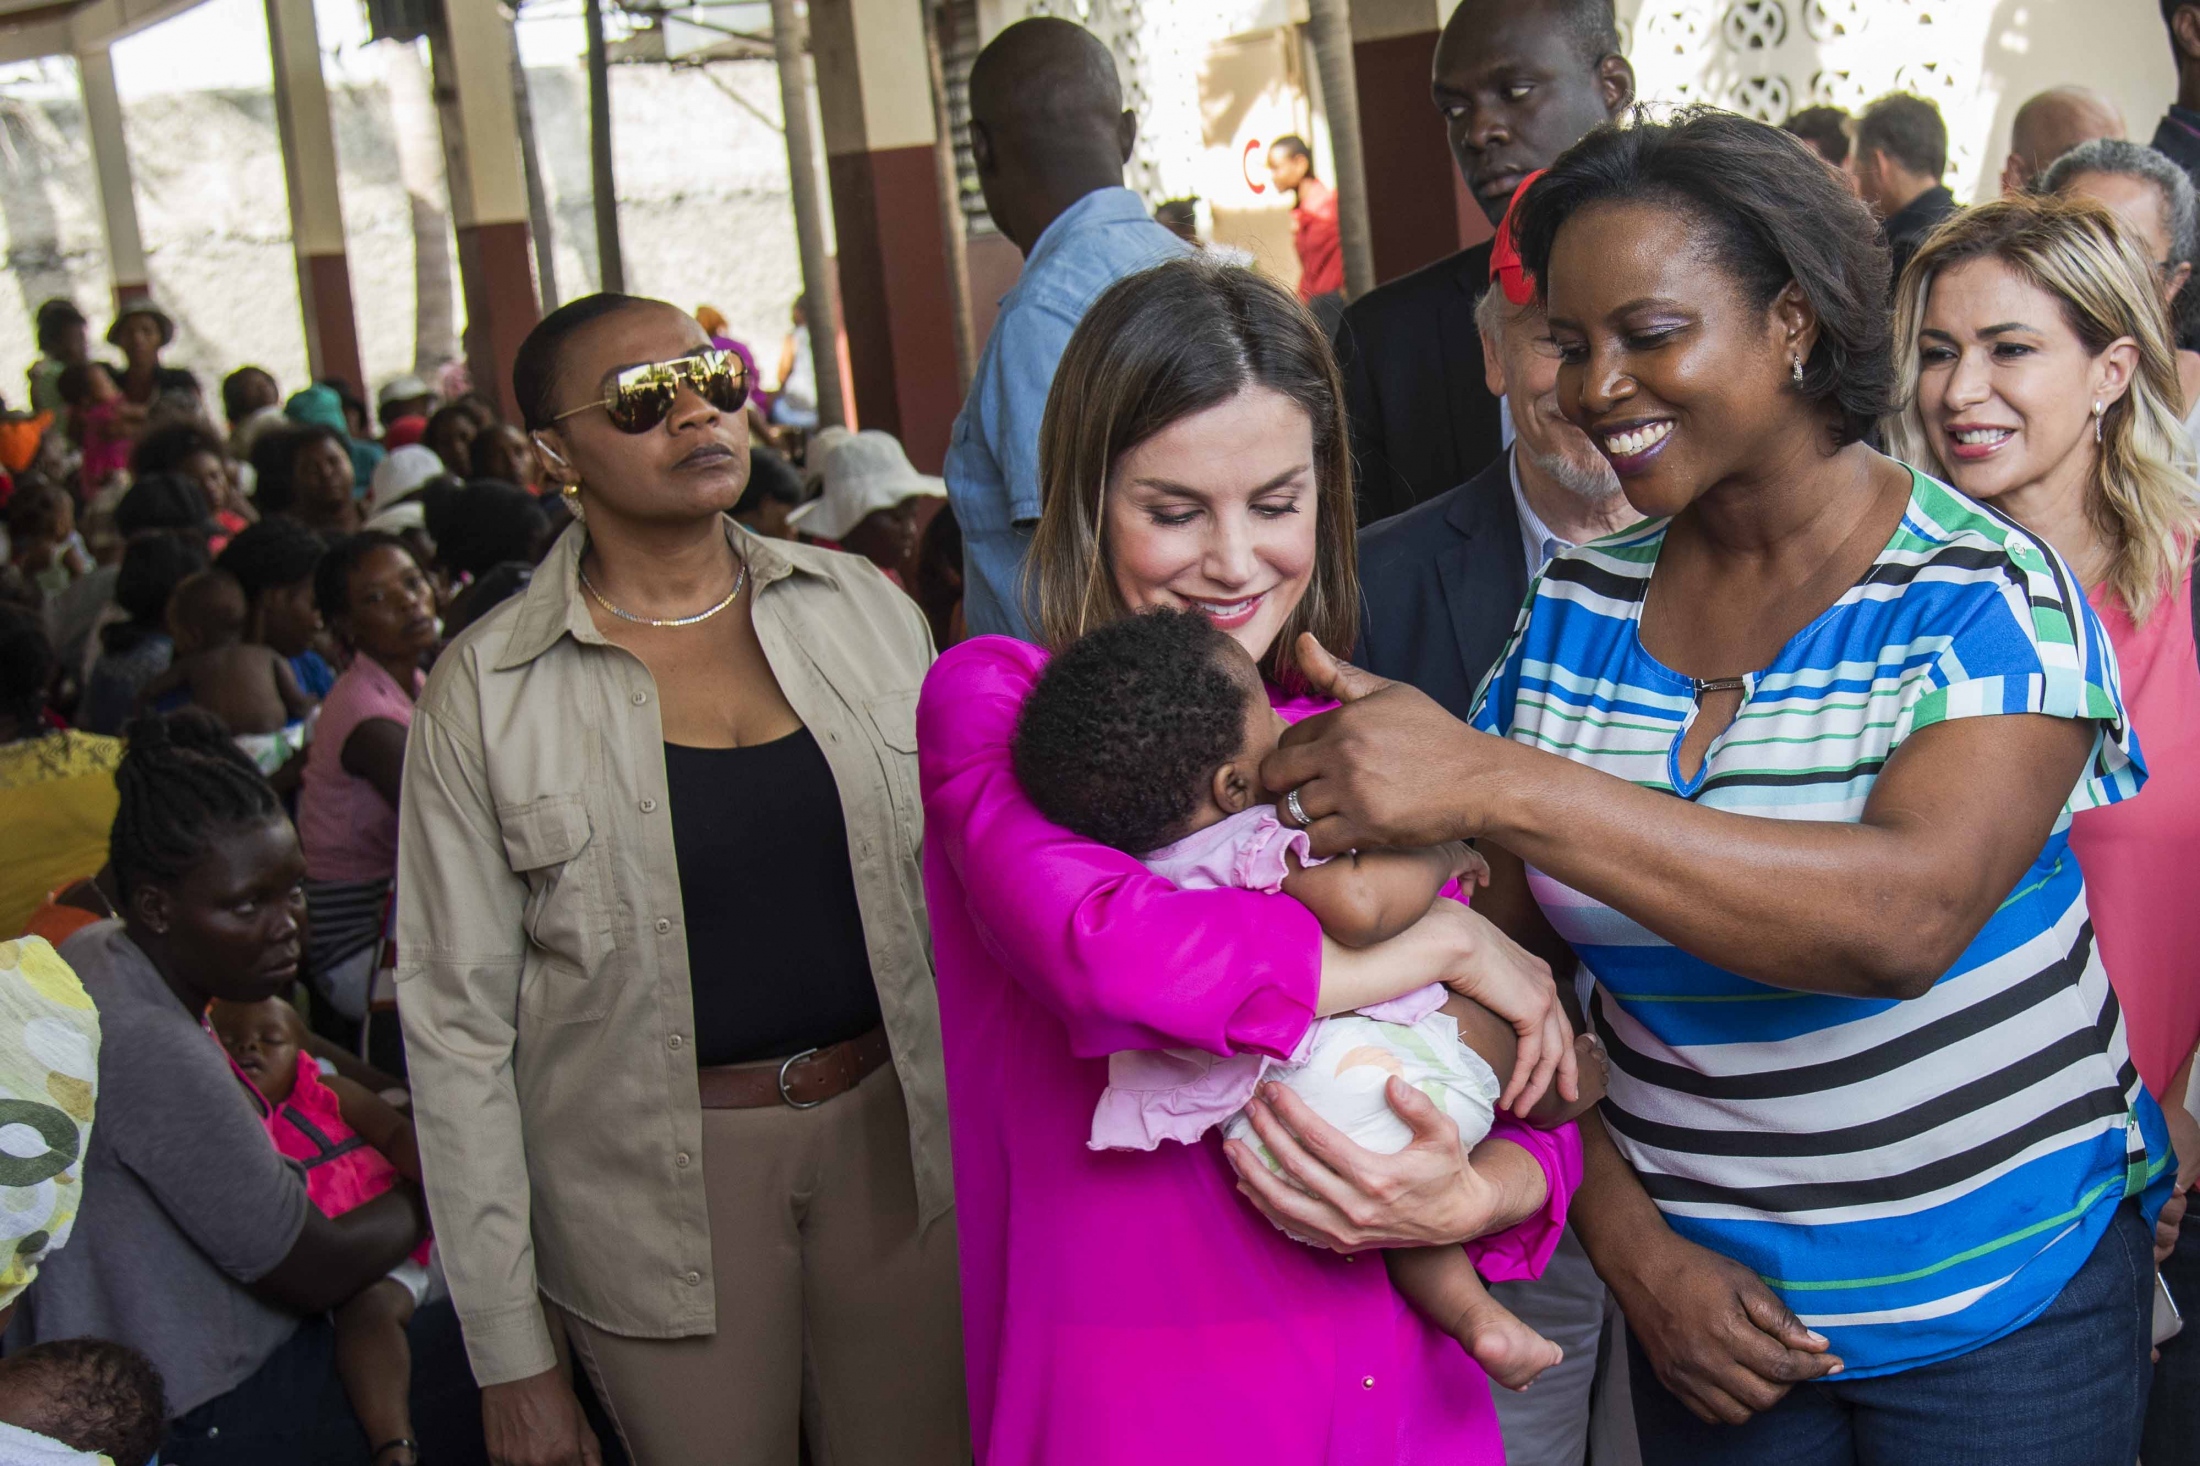 Queen of Spain travel to Haiti and visit  Saint Louise Marillac School during her stays - 